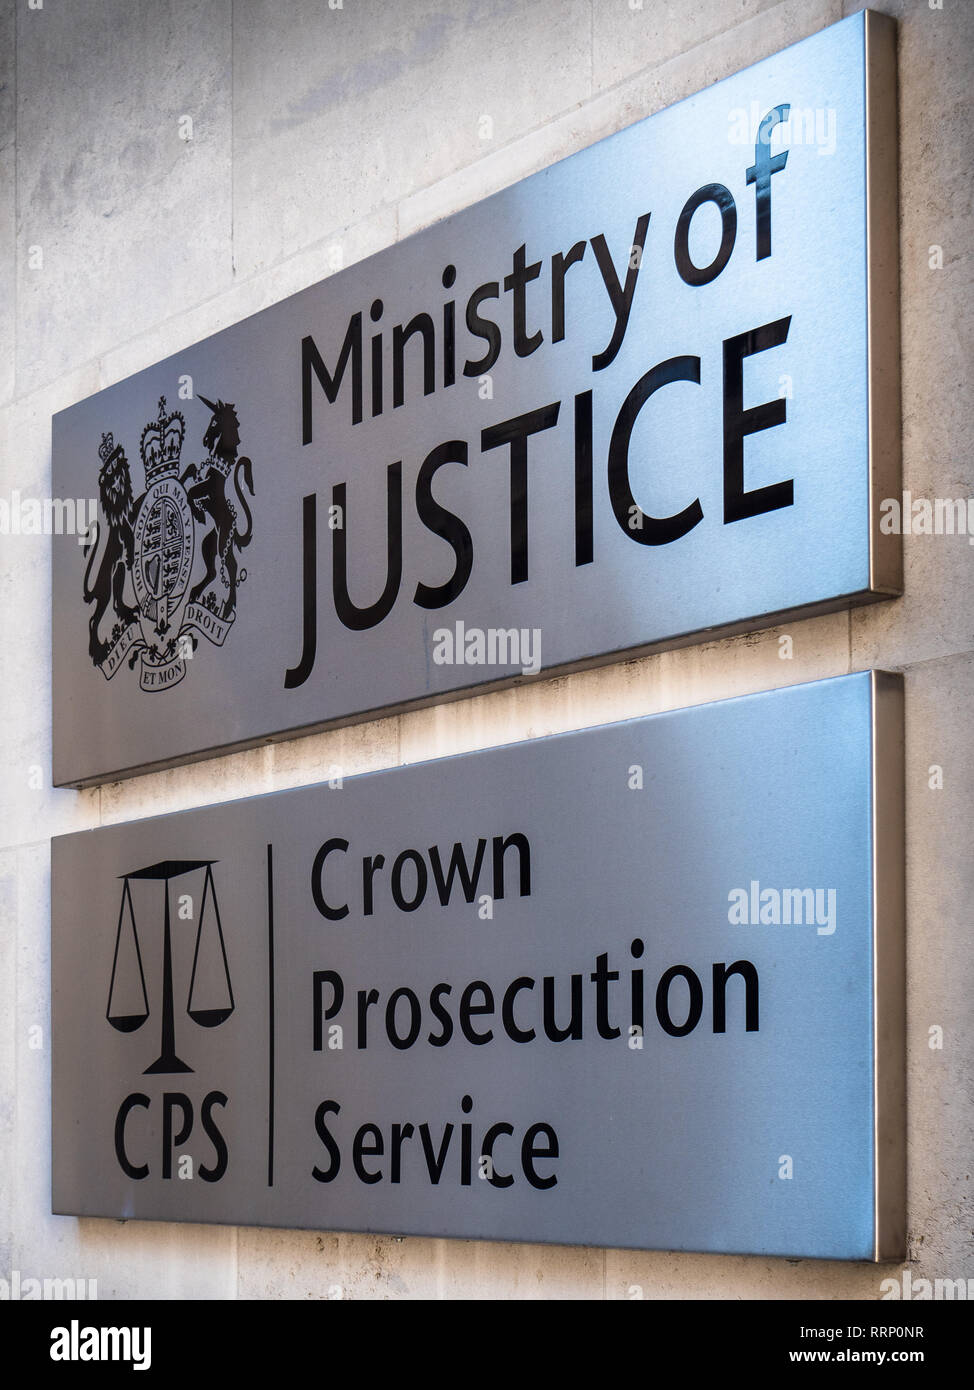 UK Ministry of Justice Crown Prosecution Service - Offices of the Ministry of Justice & Crown Prosecution Service Offices, Petty France, London Stock Photo